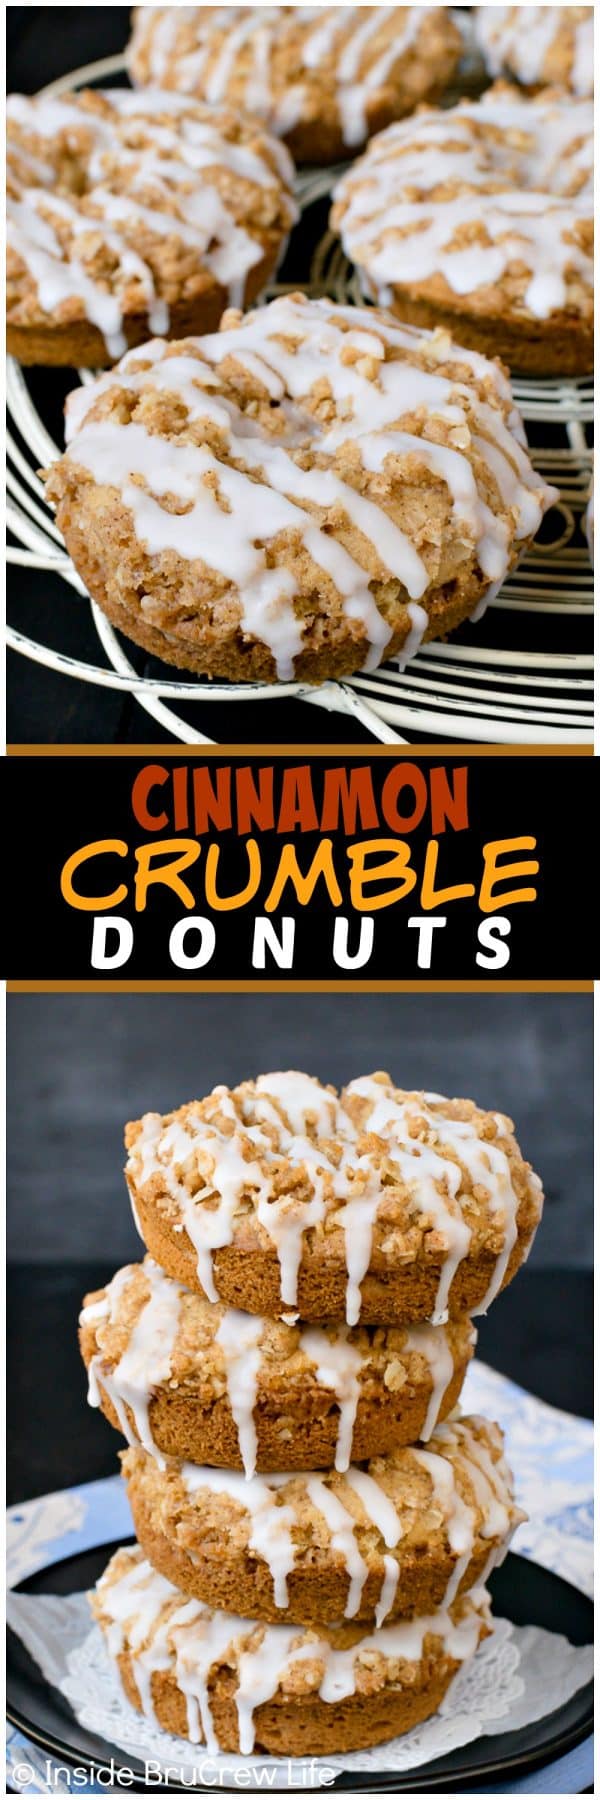 Cinnamon Crumble Donuts - these easy baked donuts are loaded with spices and streusel. The drizzle of glaze makes them absolutely irresistible and delicious. Great recipe to make for breakfast or afternoon coffee breaks. #donuts #cinnamon #homemade #coffeetime #brunch #breakfast #cakedonuts #baked